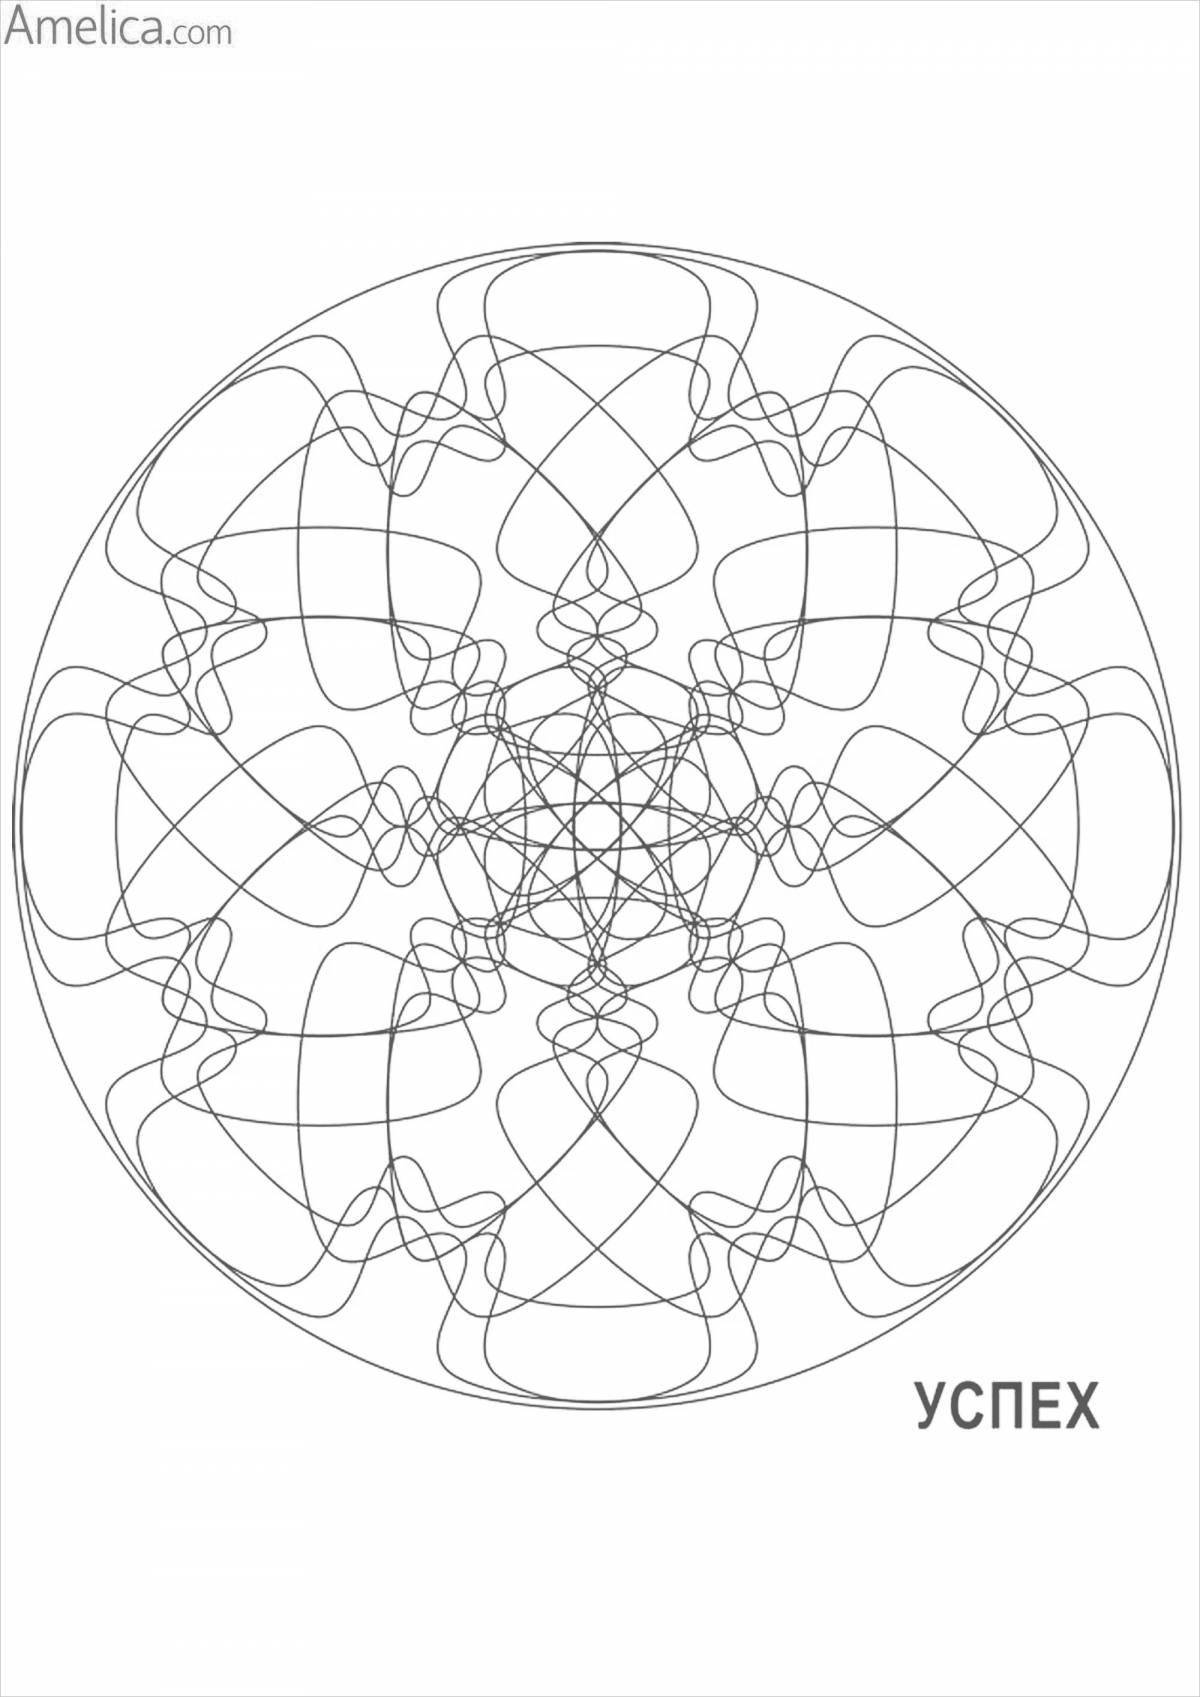 Exquisite wealth and prosperity mandala coloring book